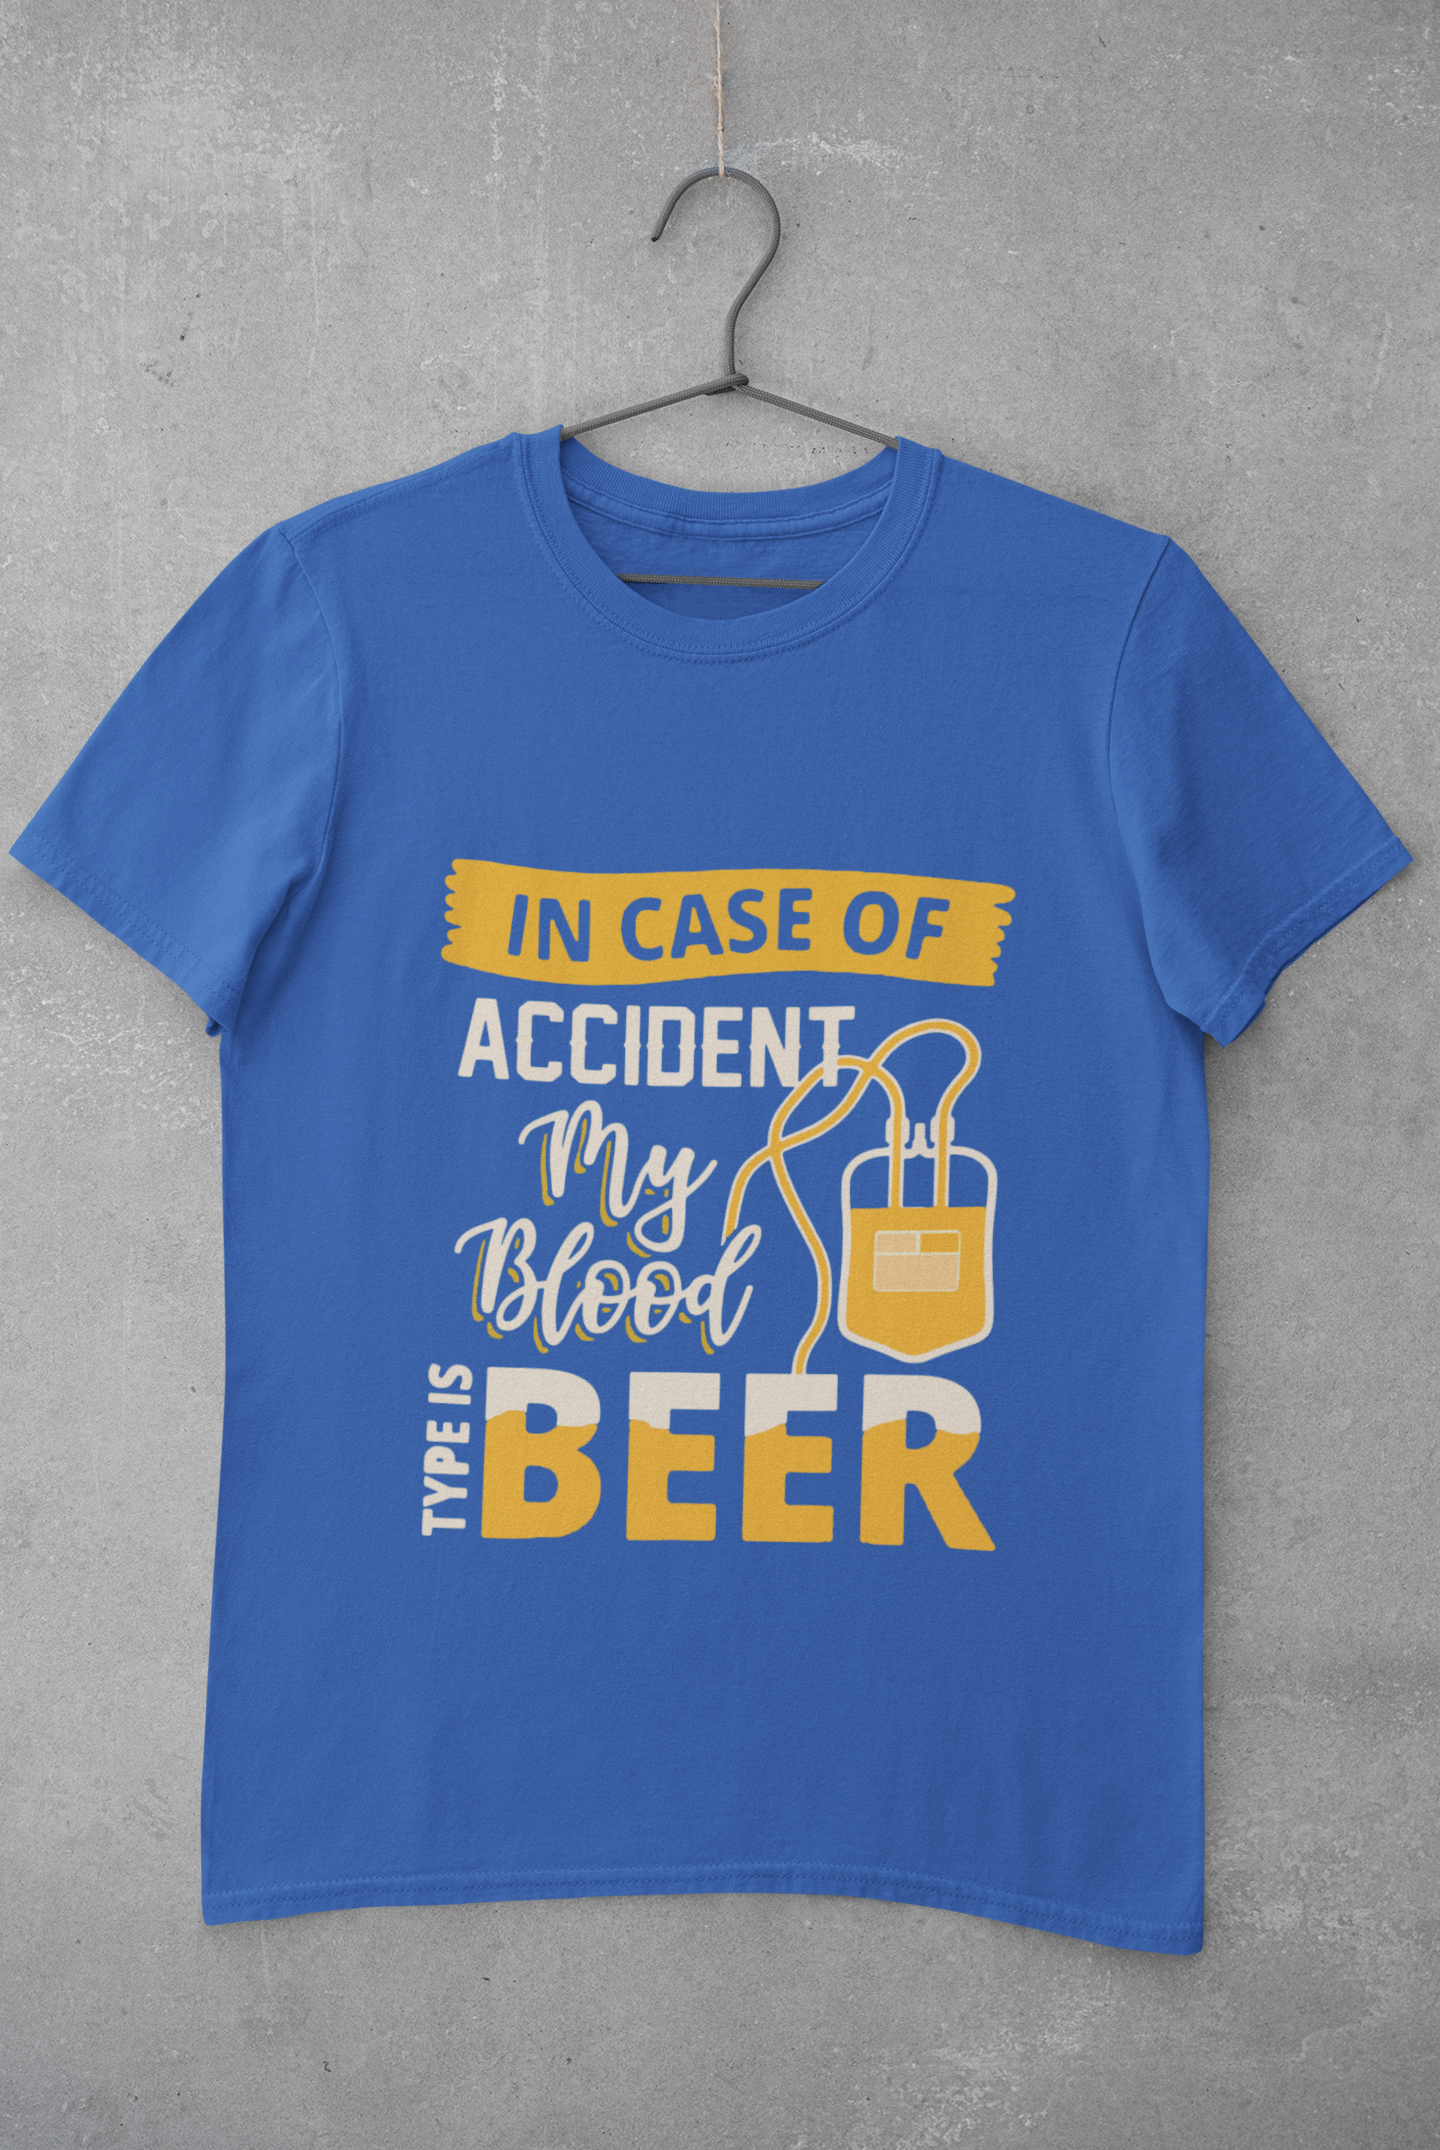 My Blood Type Is Beer Women Half Sleeves T-shirt- FunkyTradition